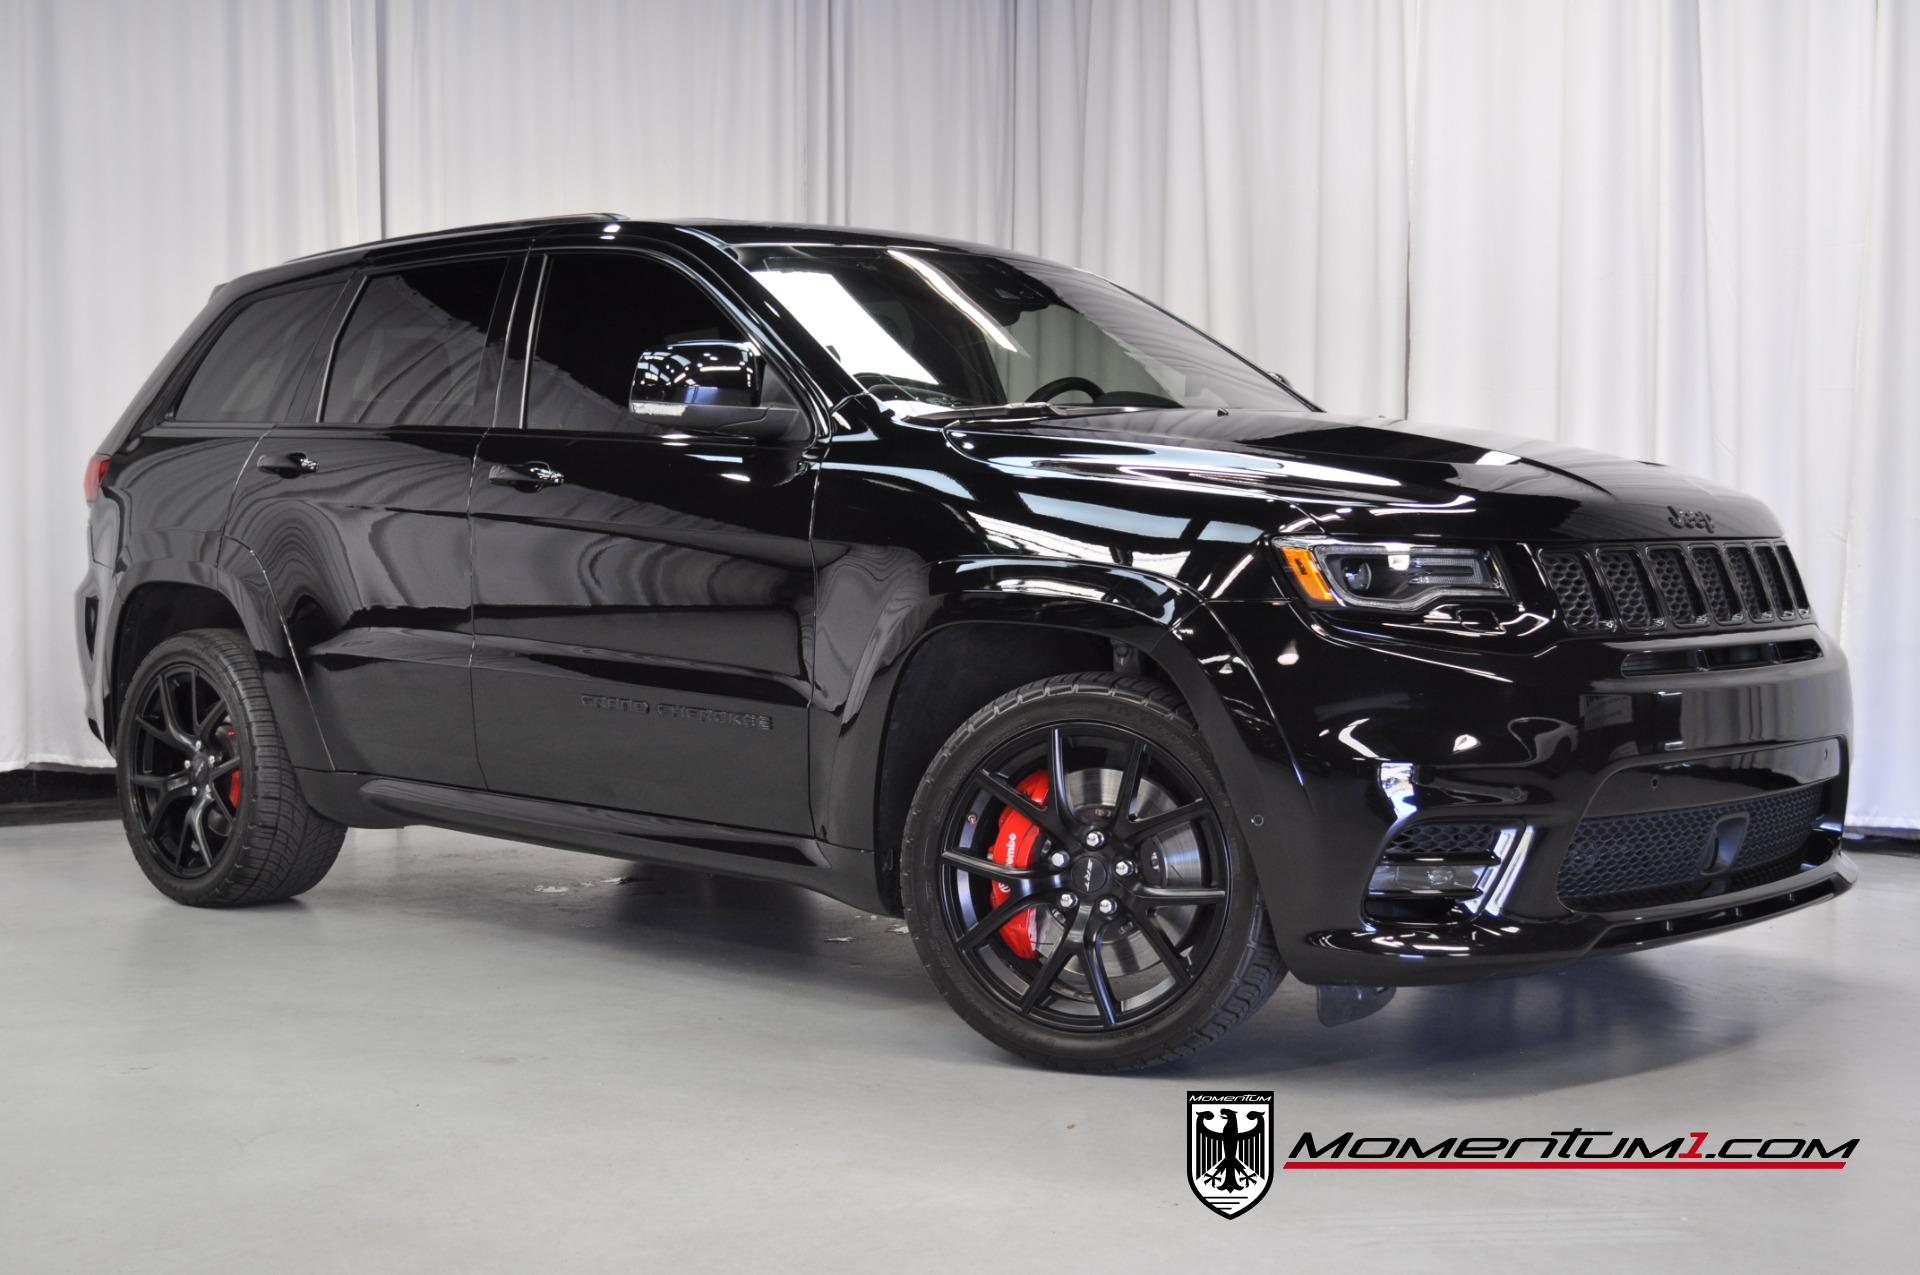 Used 2019 Jeep Grand Cherokee SRT For Sale (Sold) Momentum Motorcars